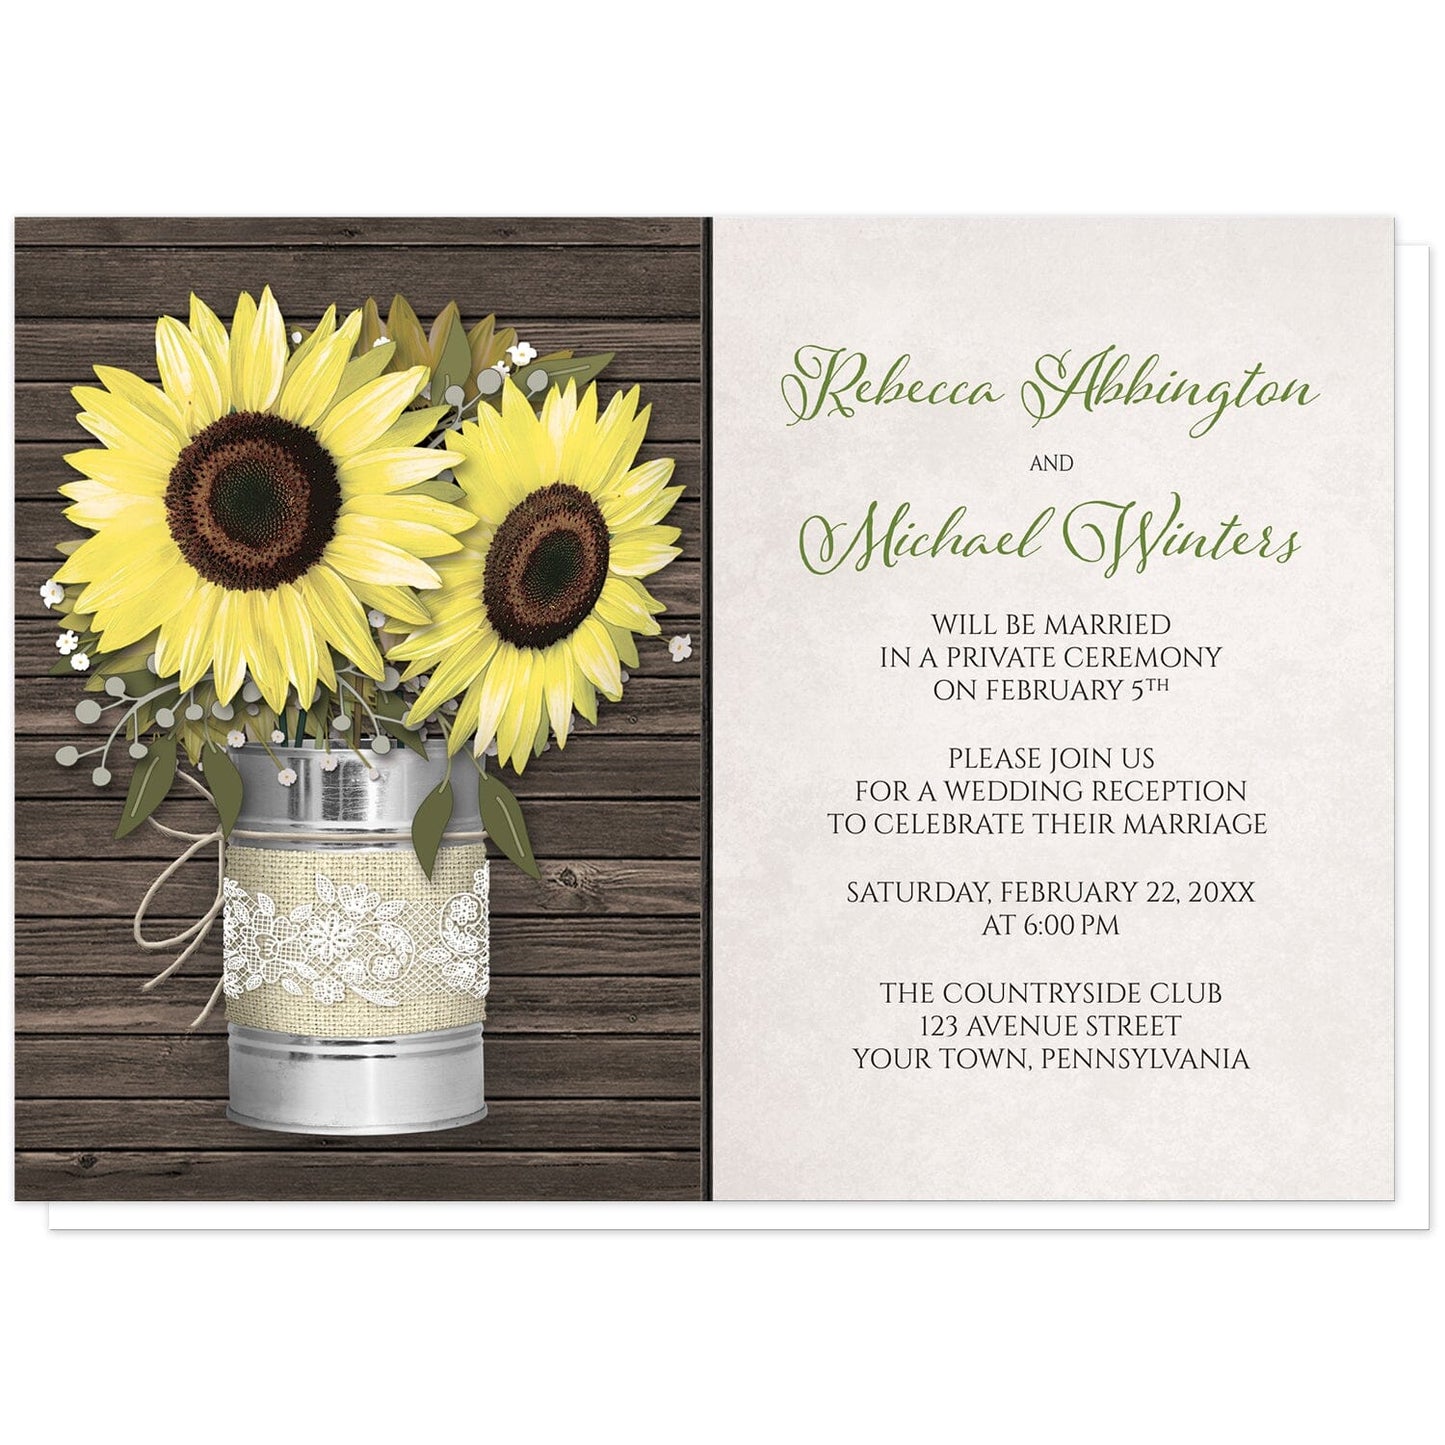 Rustic Burlap and Lace Tin Can Sunflower Reception Only Invitations at Artistically Invited. Rustic burlap and lace tin can sunflower reception only invitations with an illustration of big yellow sunflowers inside a rustic metal tin can wrapped in burlap and lace and tied with twine over a dark wood background. Your personalized post-wedding reception details are custom printed in green and brown over a beige background to the right of the tin can sunflowers.